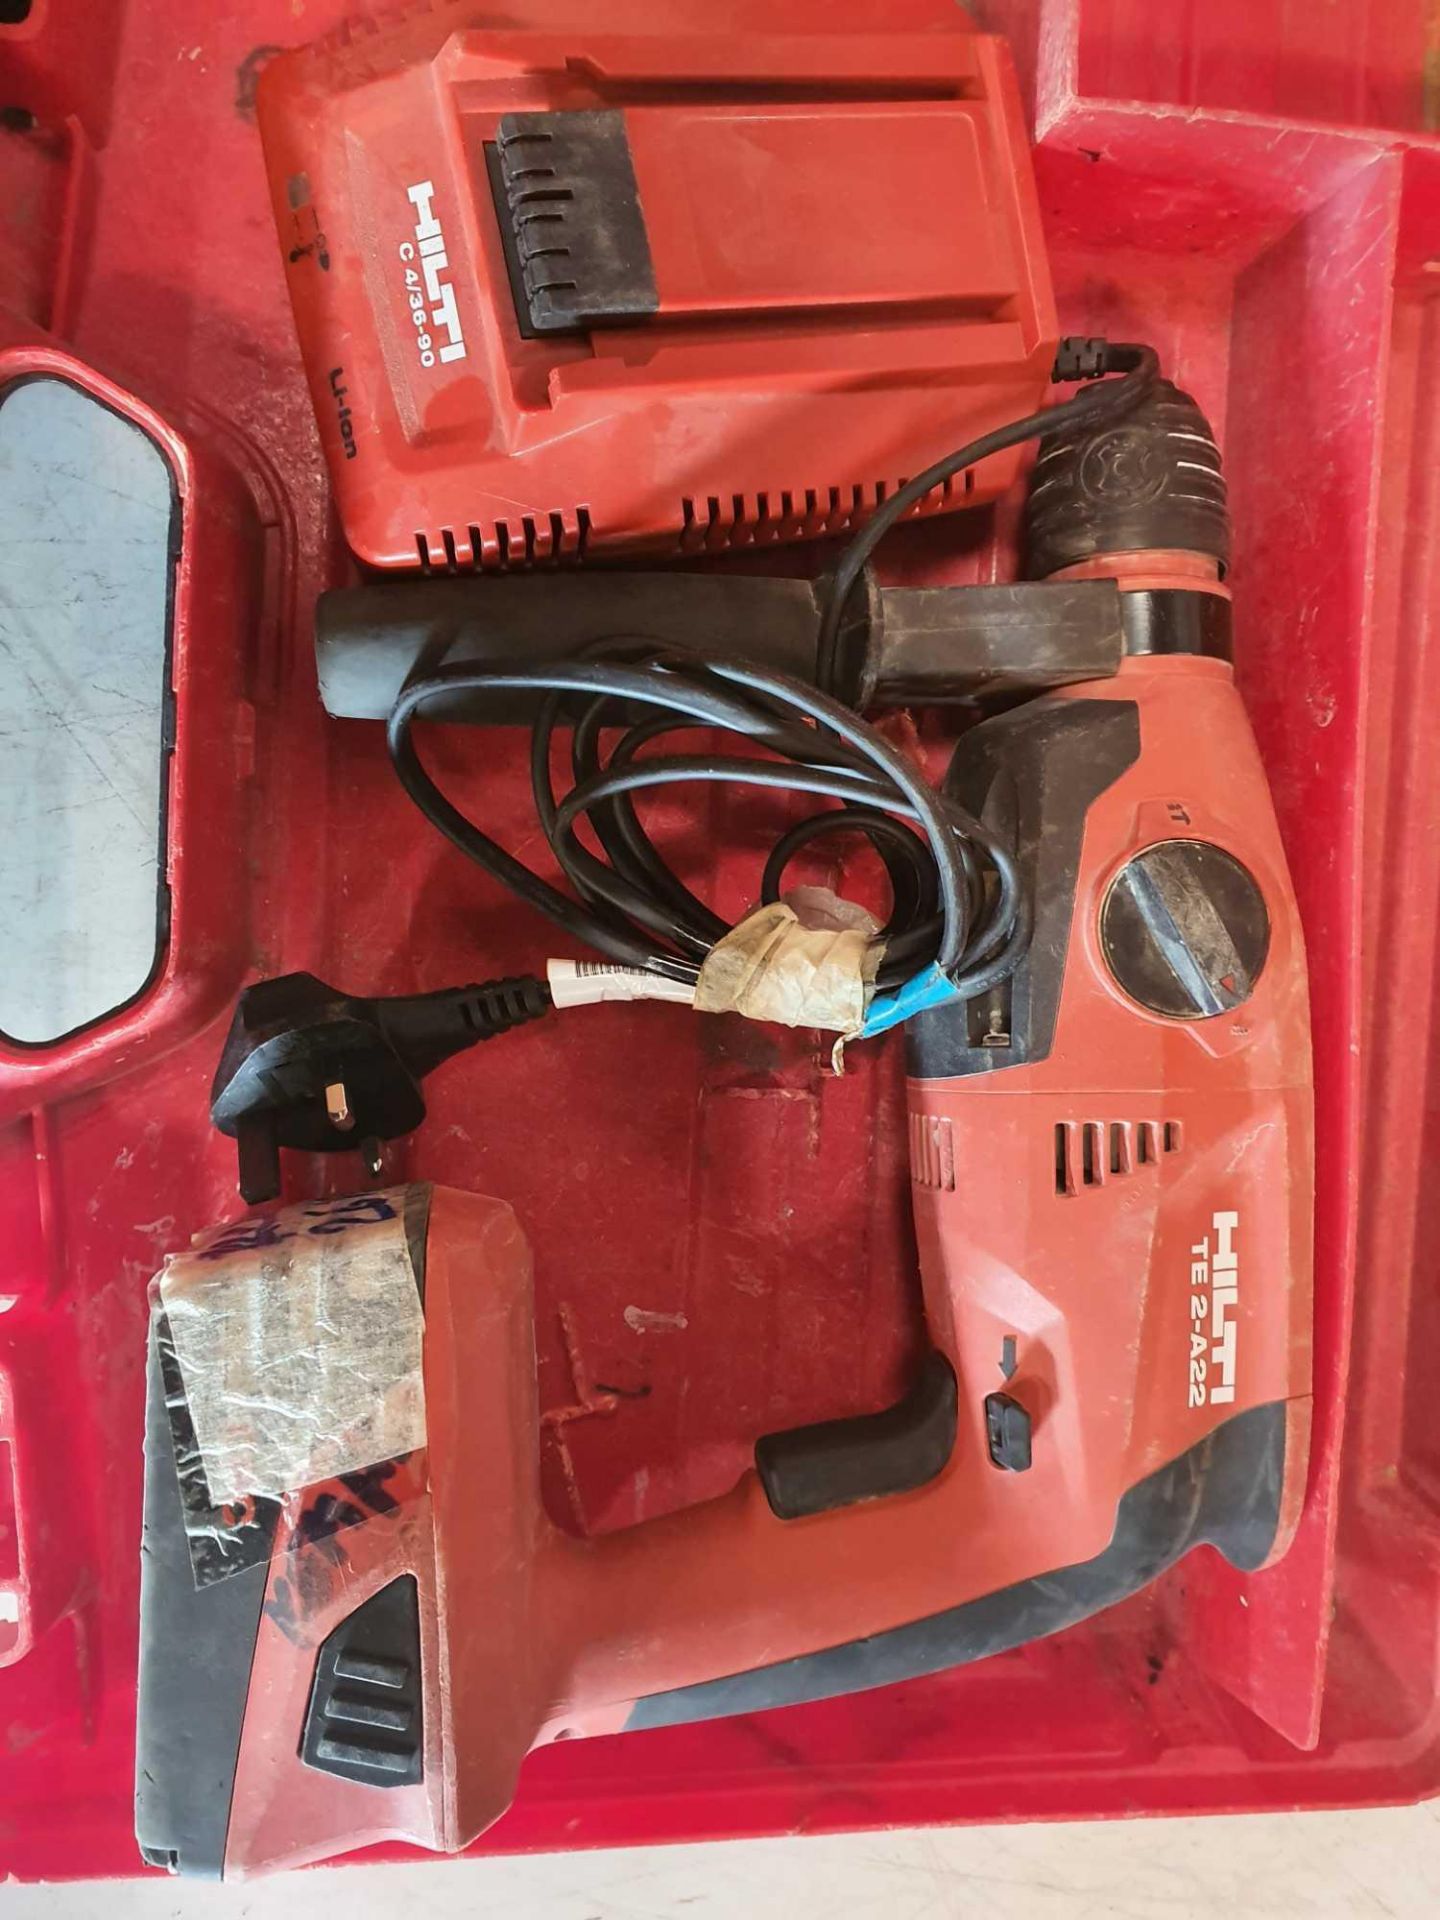 Hilti 18v rotary hammer drill with charger - Image 3 of 3